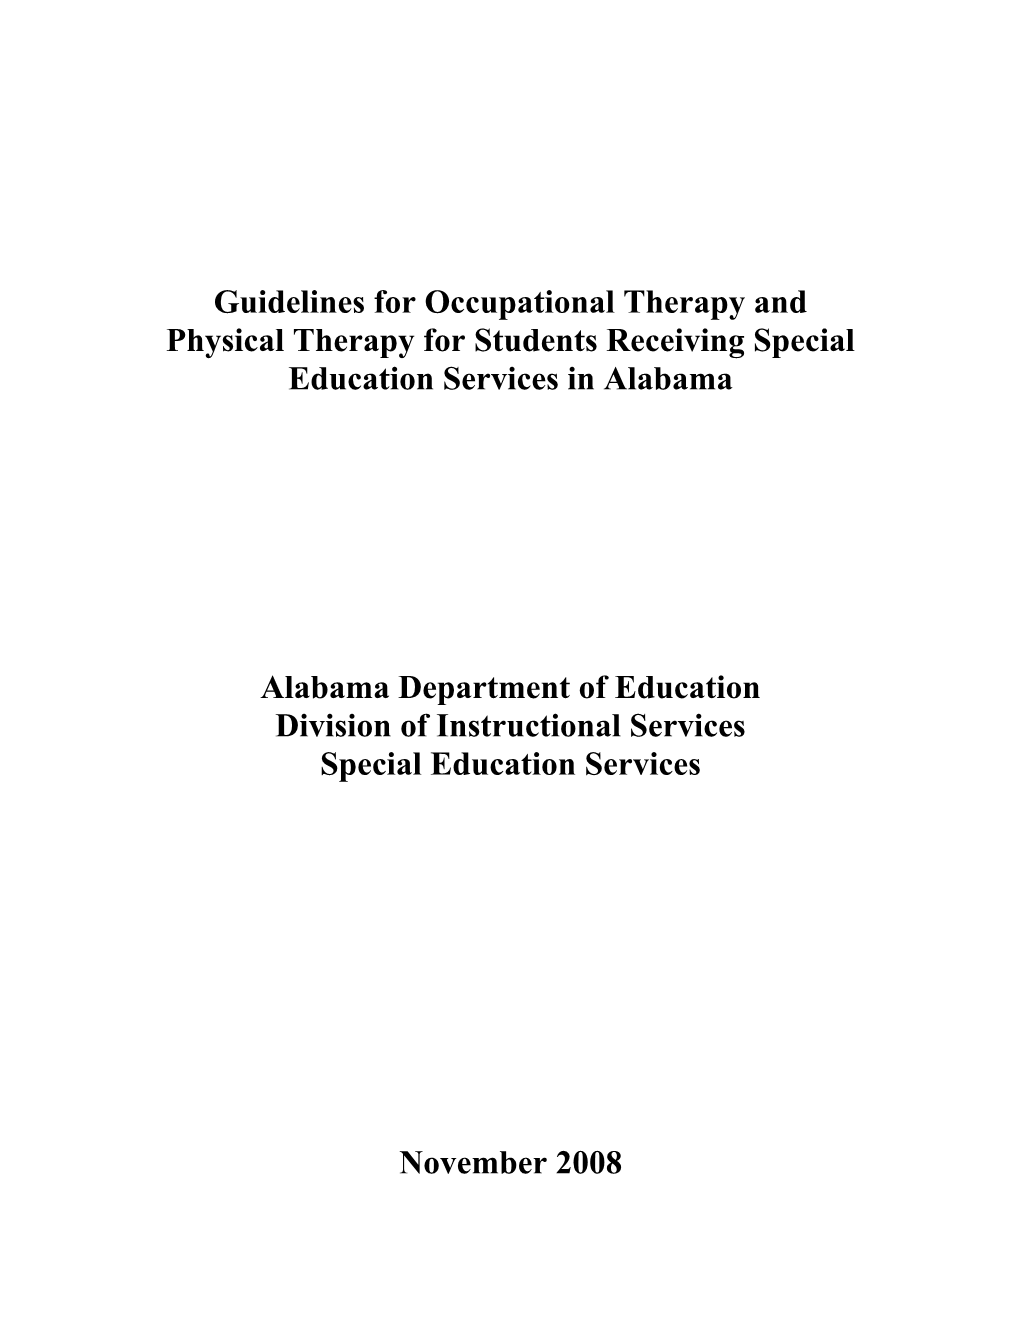 Guidelines for Occupational Therapy and Physical Therapy for Students Receiving Special